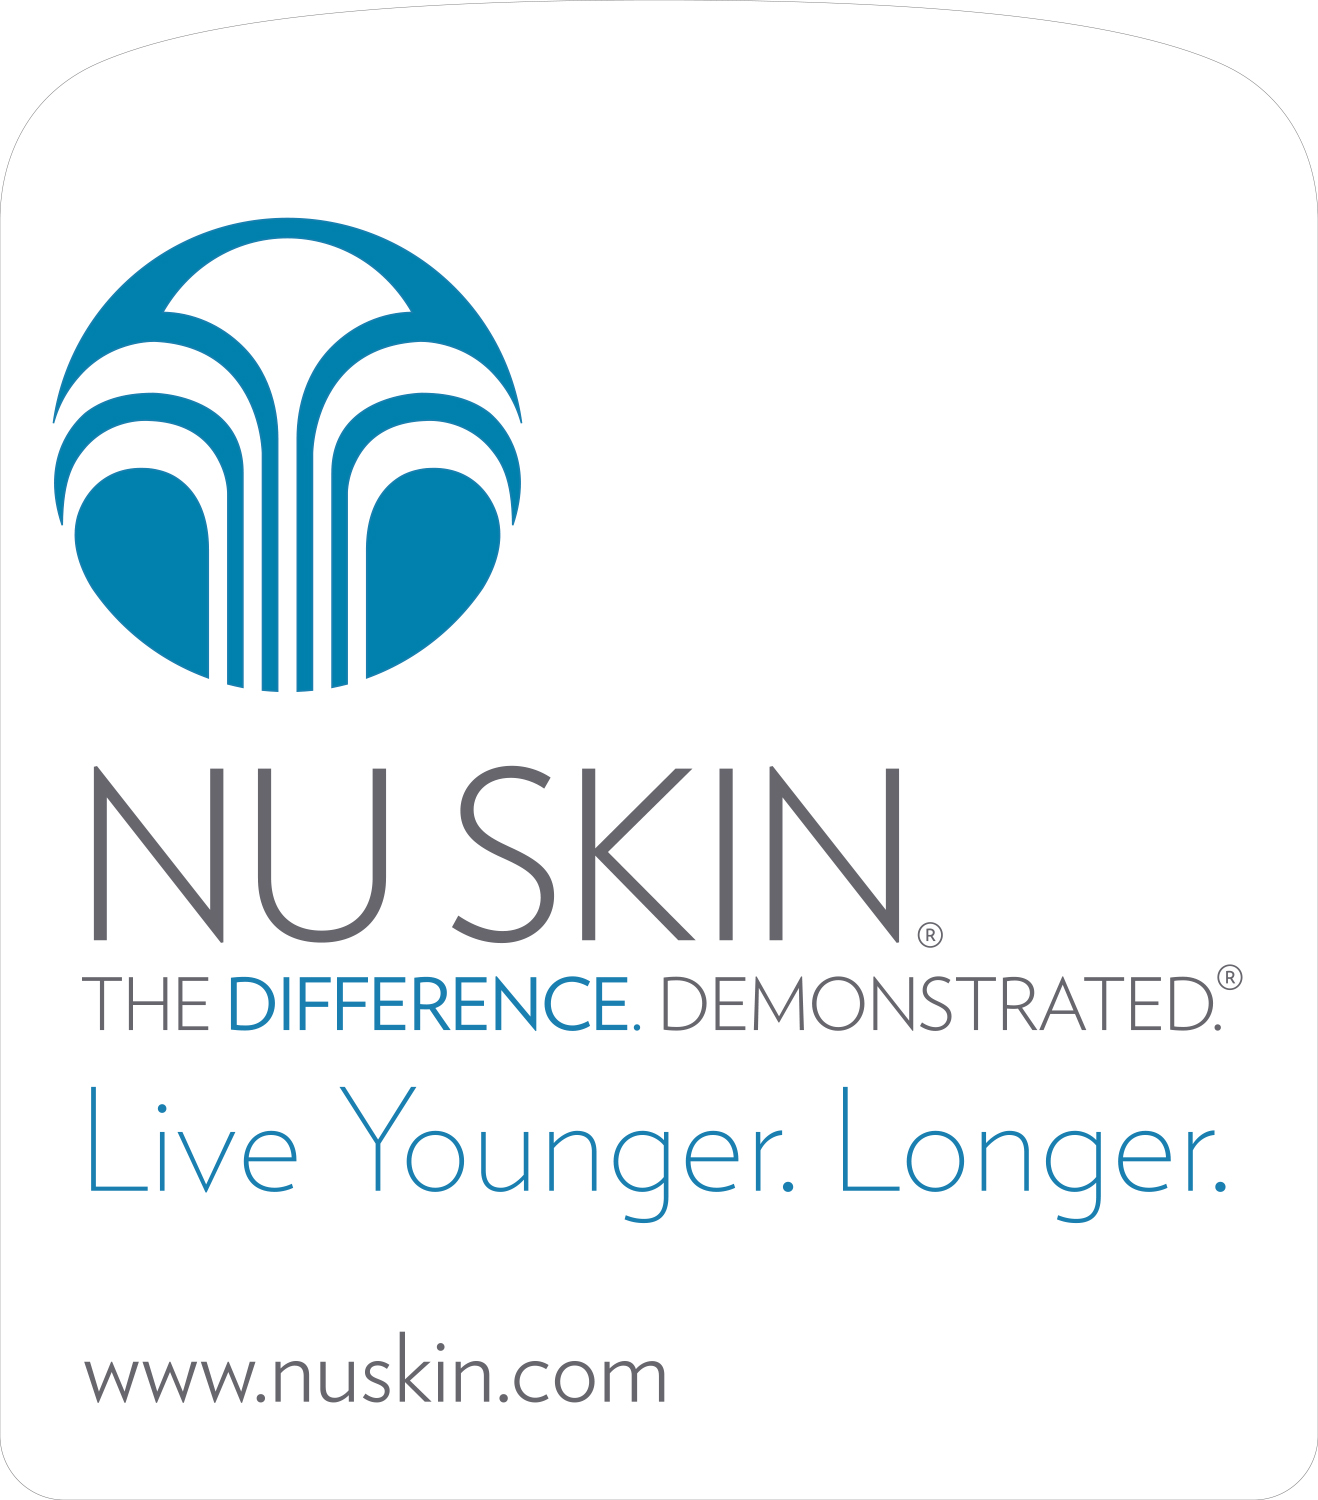 Taxi Superside Advertising -  nu skin campaign